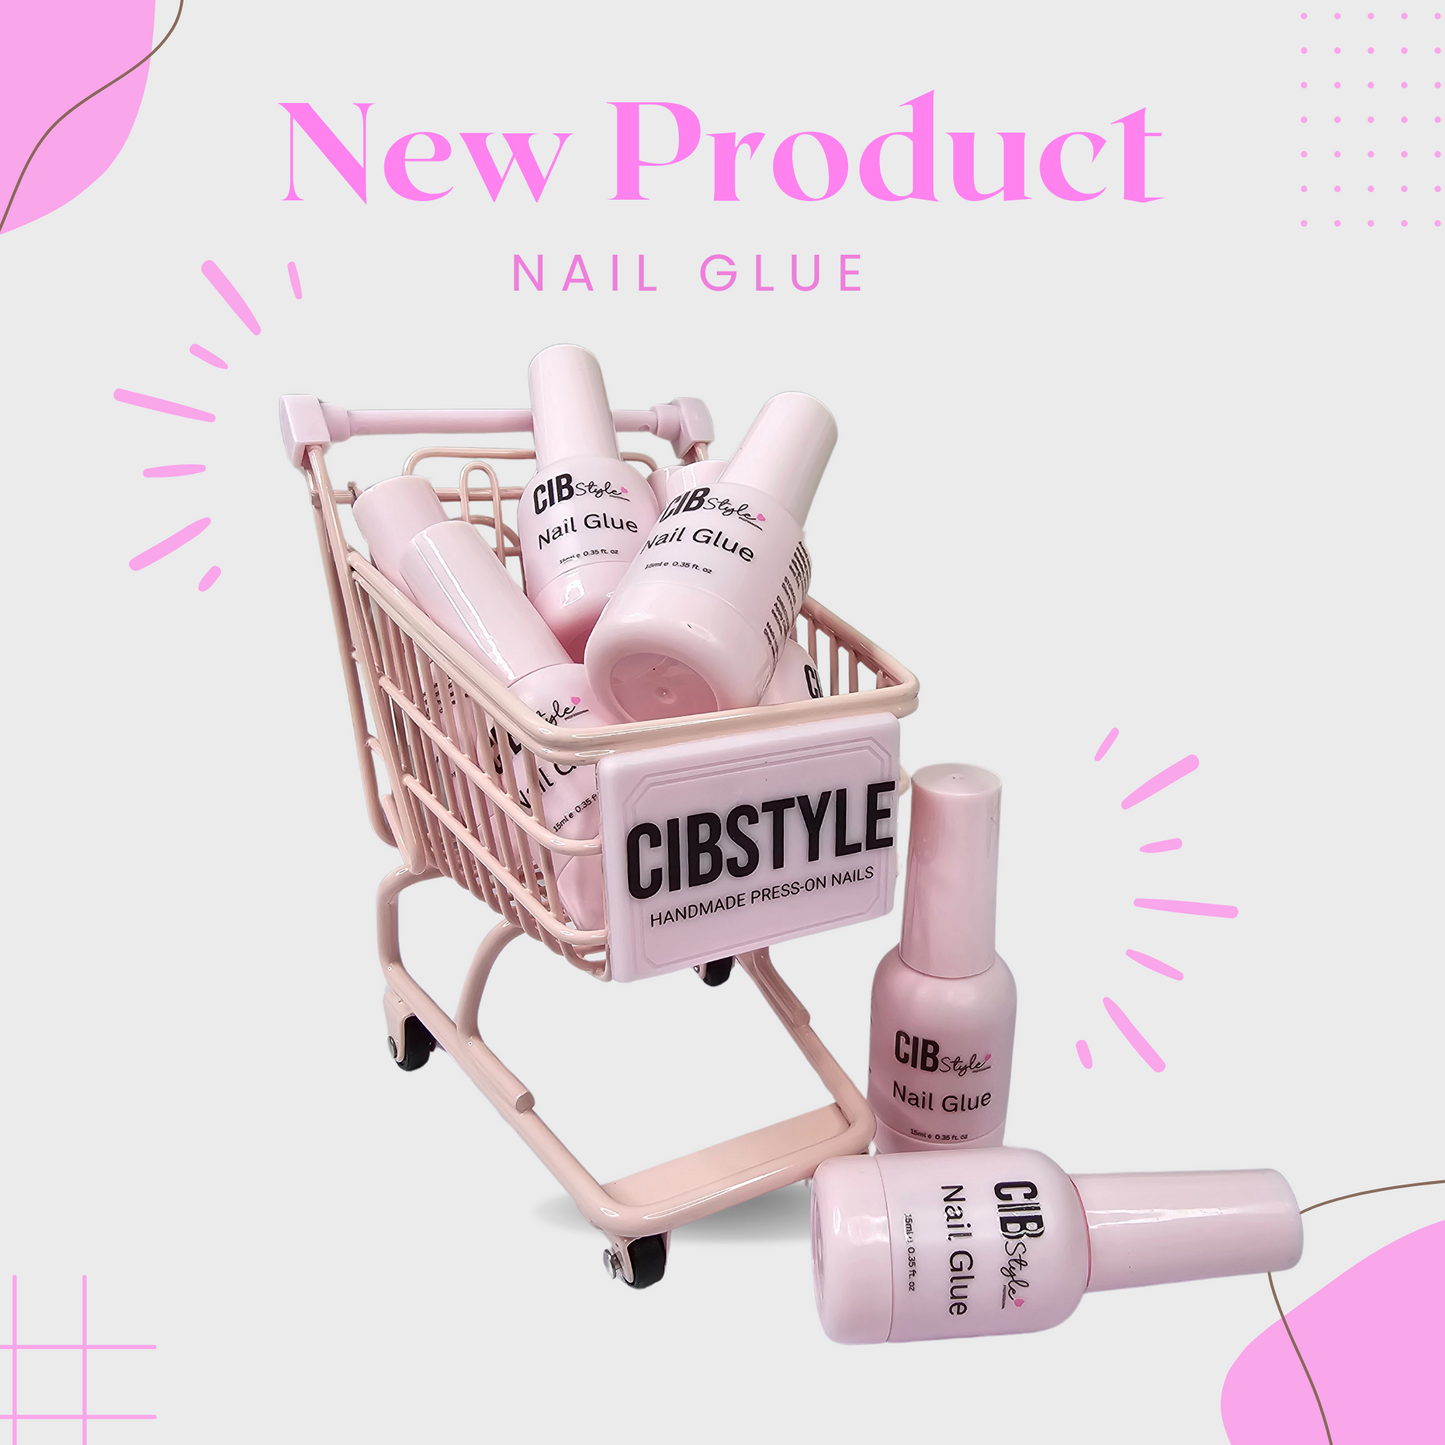 CIBSTYLE BRUSH ON NAIL GLUE FOR PRESS-ON NAILS SUPER STRONG NAILS GLUE